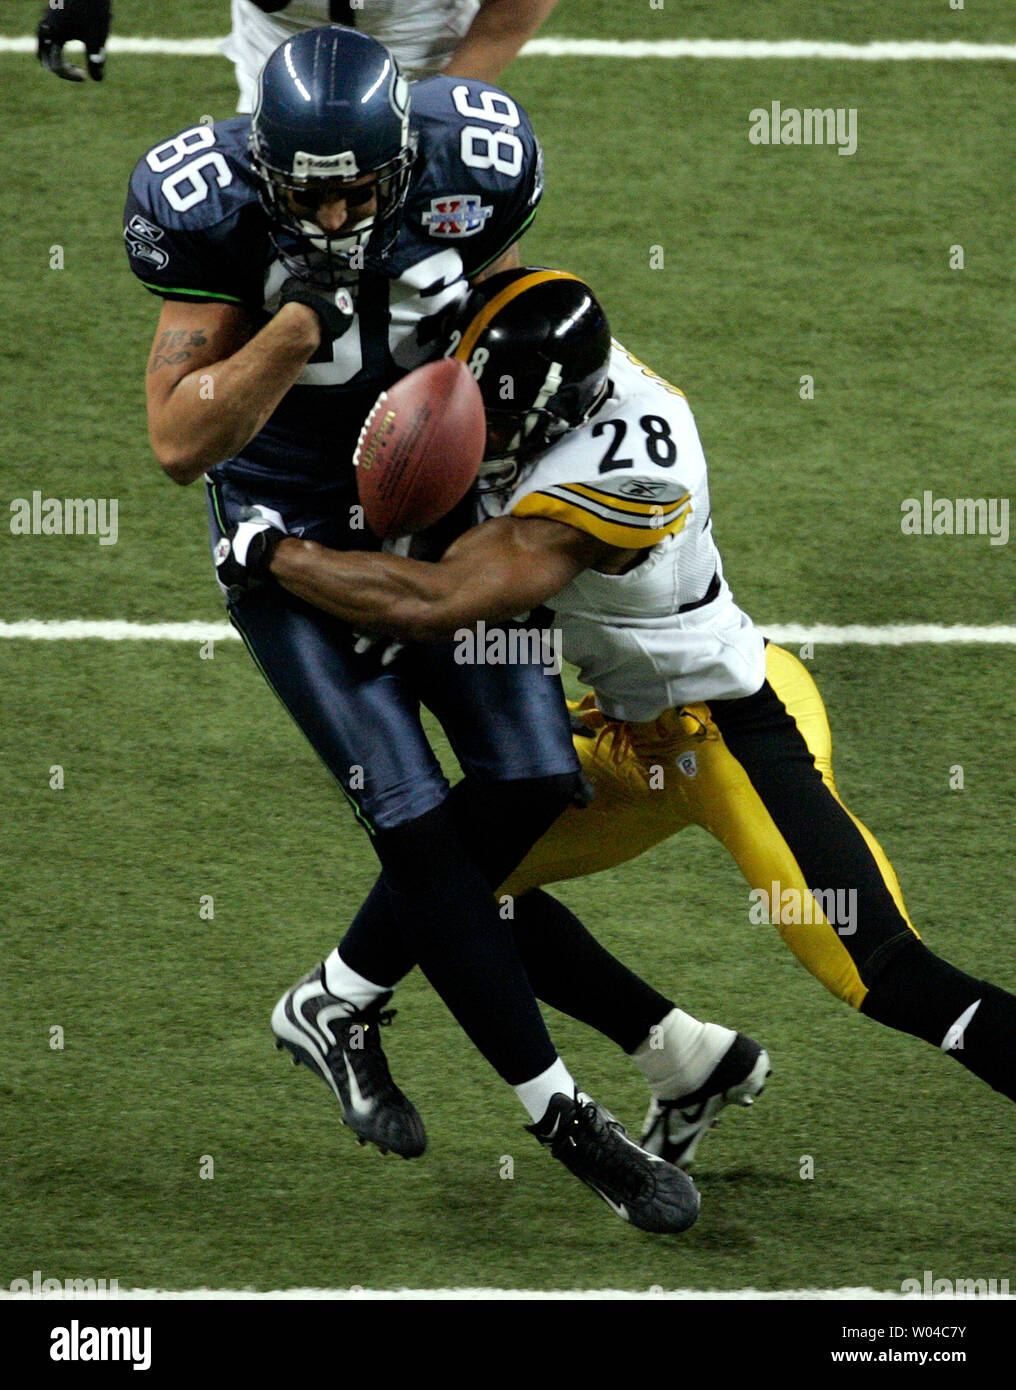 Jerramy Stevens of the Seattle Seahawks drops the pass as he is tackled by Pittsburgh Steelers safety Chris Hope in the second quarter of Super Bowl XL featuring the Seattle Seahawks and the Pittsburgh Steelers at Ford Field in Detroit, Mi., on February 5, 2006.  (UPI Photo/Gary Caskey) Stock Photo